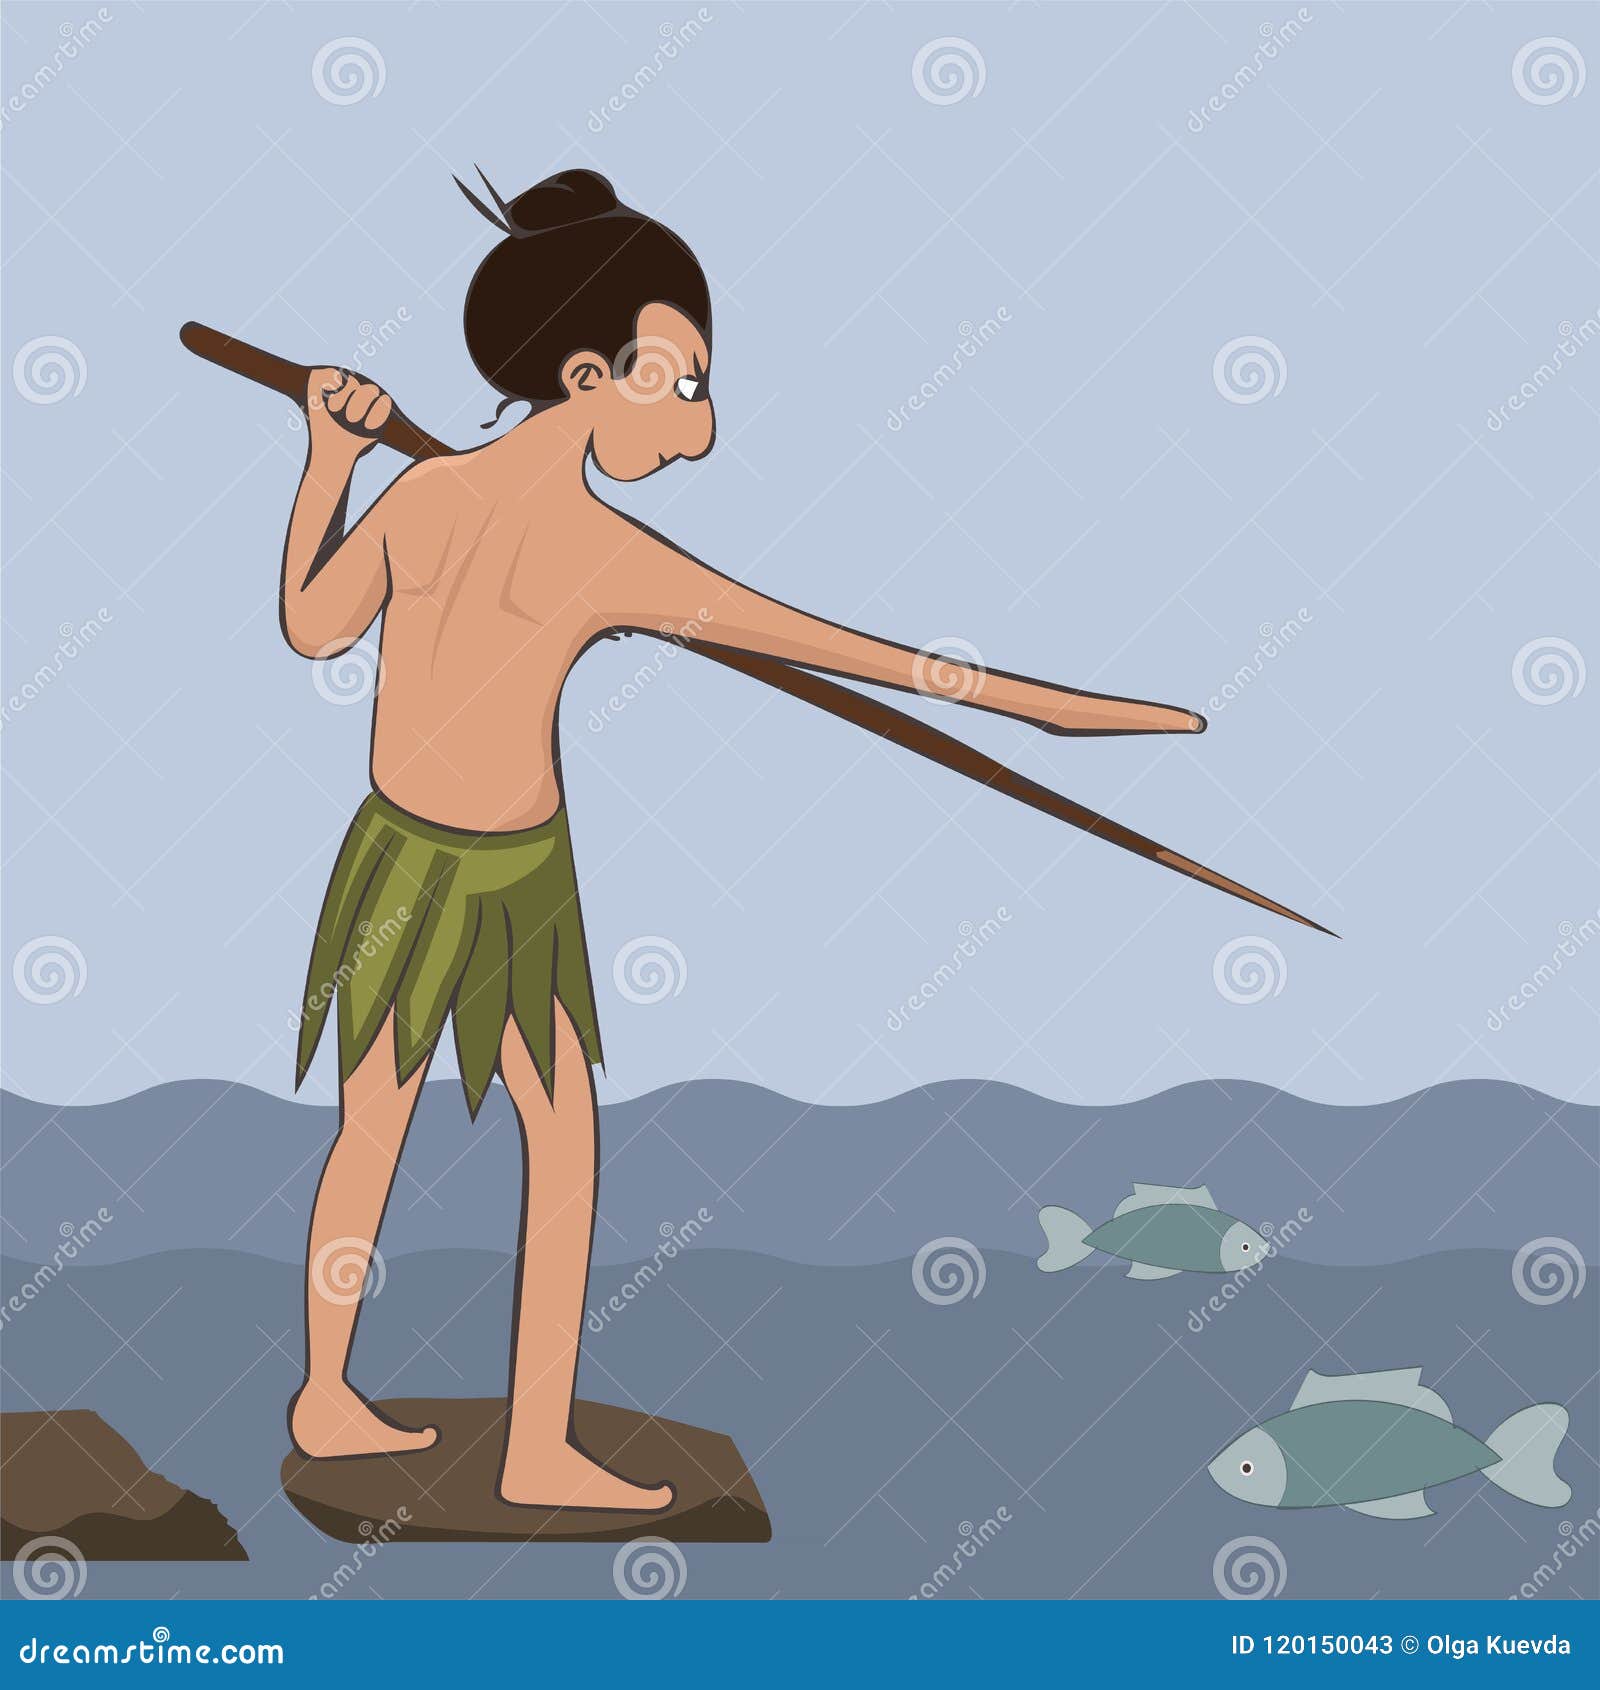 Primitive Boy Catching Fish with Pointed Stick Stock Vector - Illustration  of primitive, doodle: 120150043